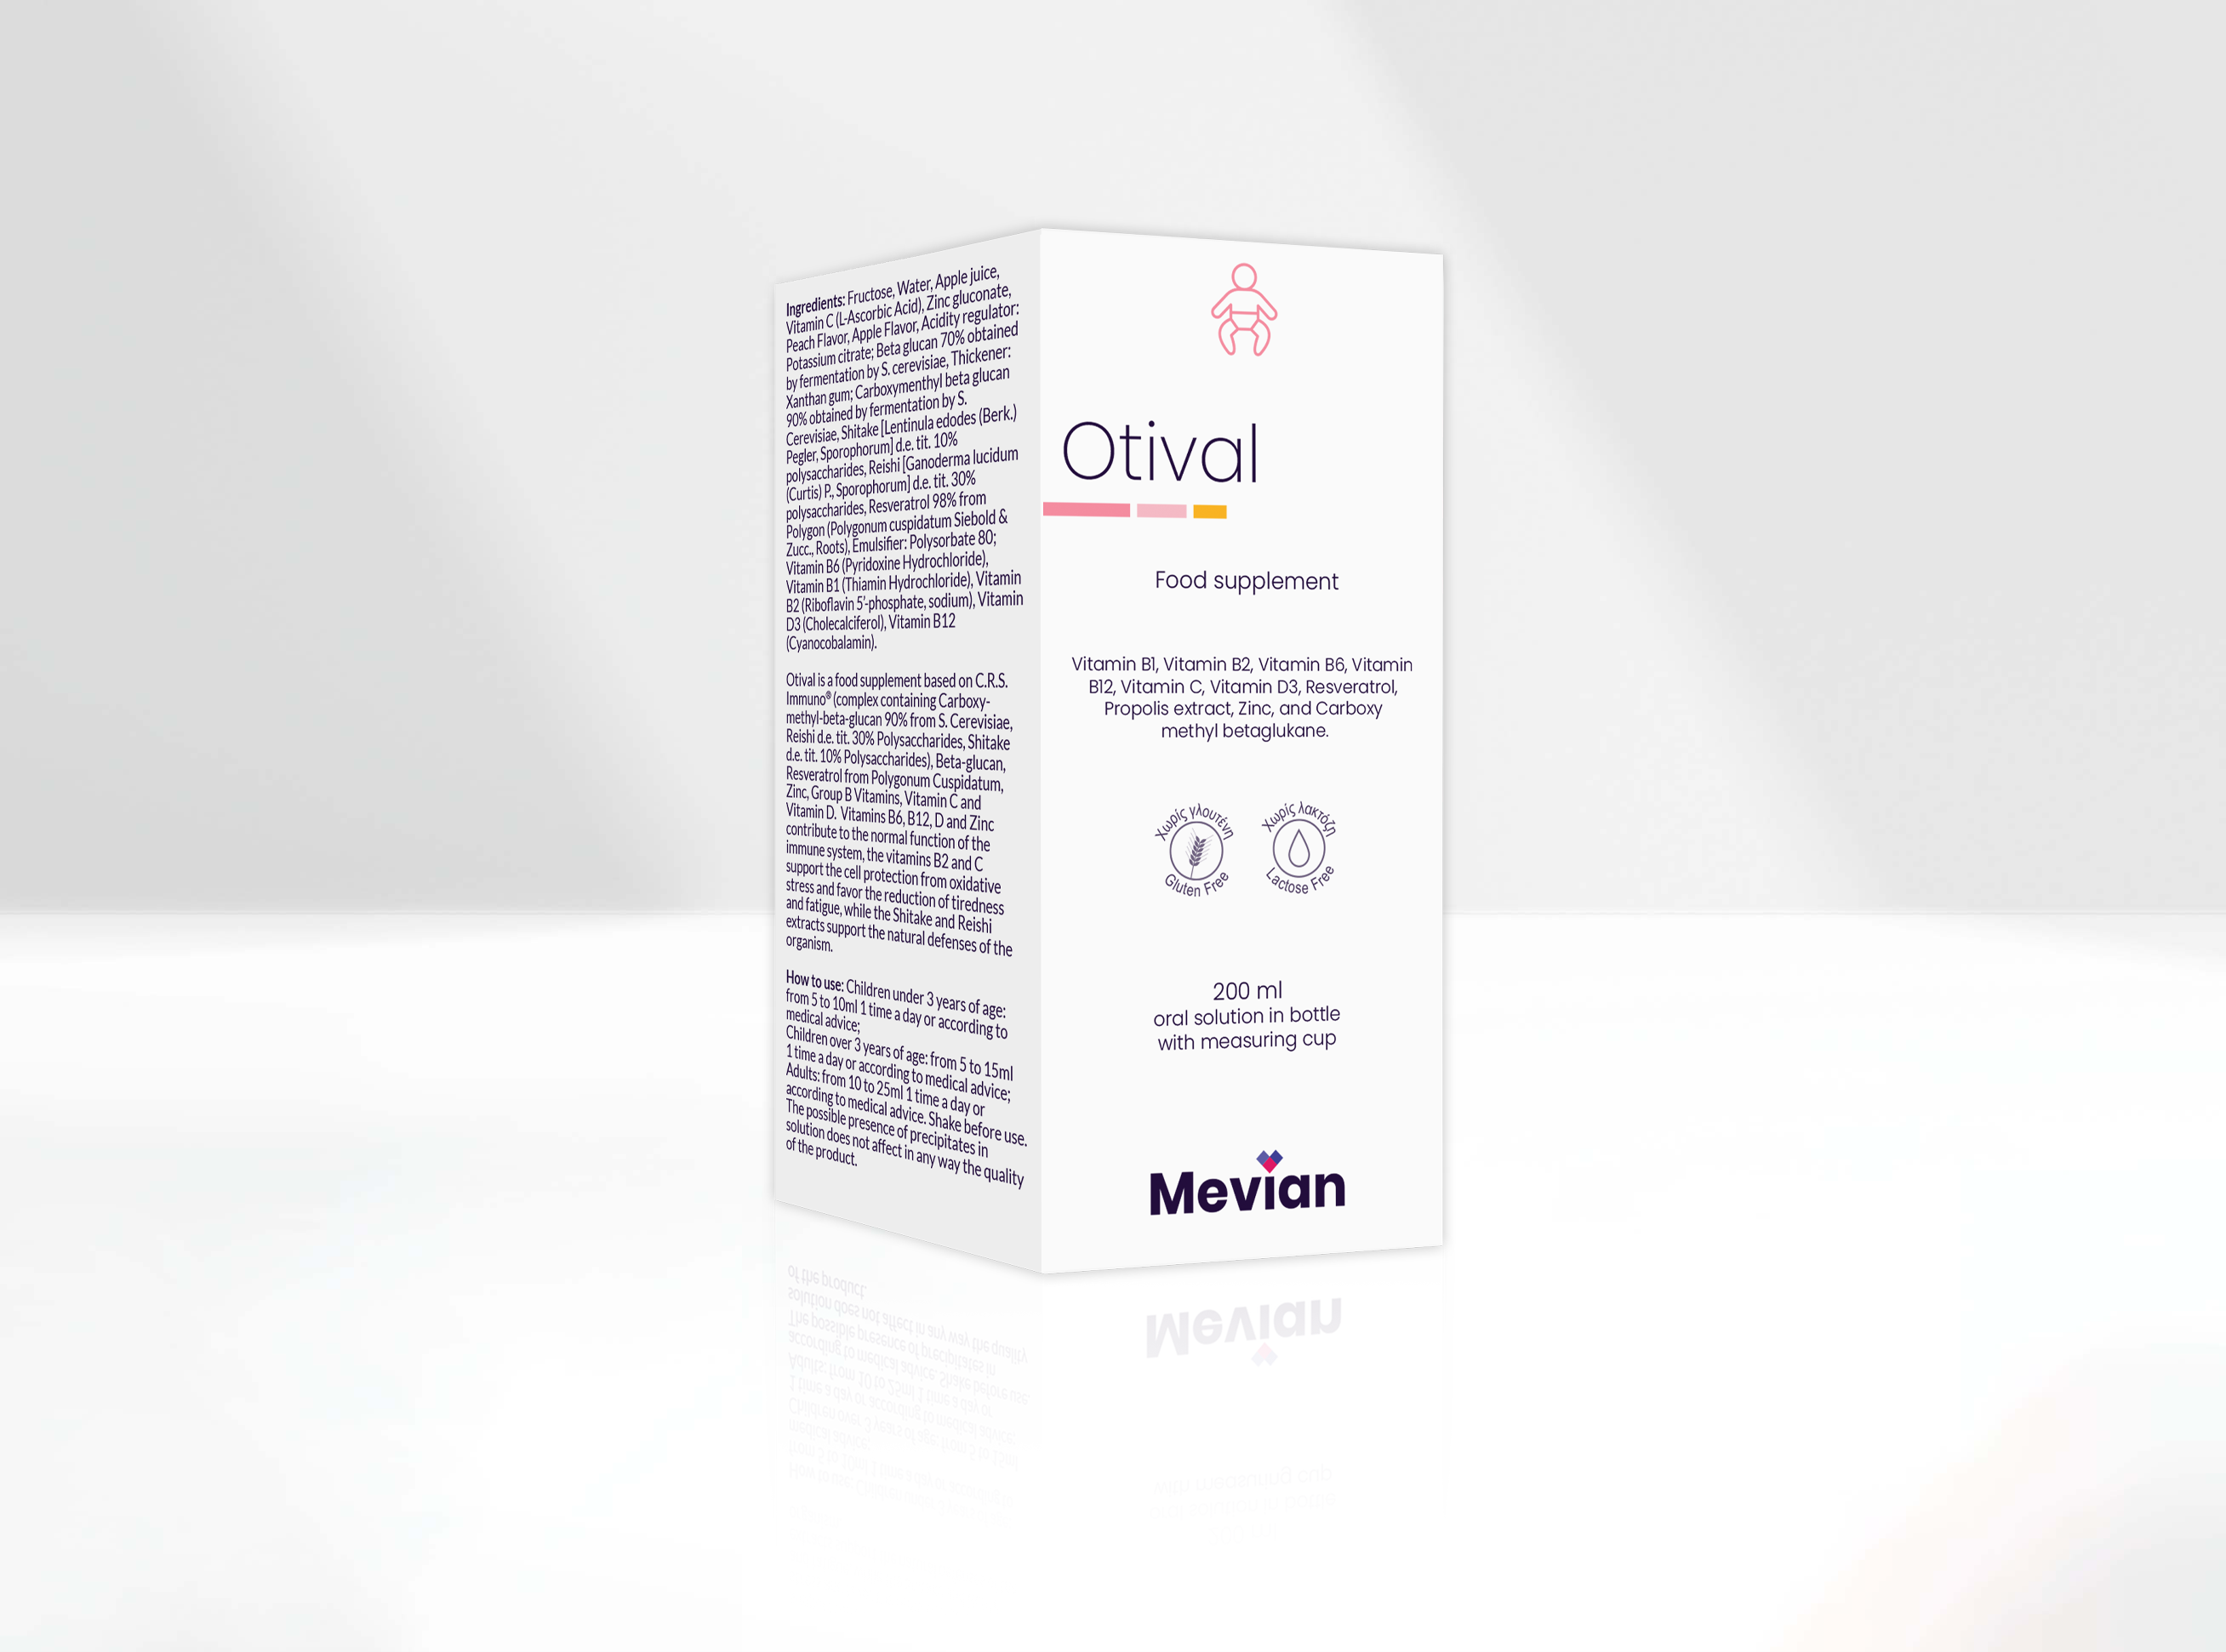 Otival is A clinically tested supplement that provides prevention of acute and recurrent infections of the lower respiratory tract and otitis while also boosting immunity support.